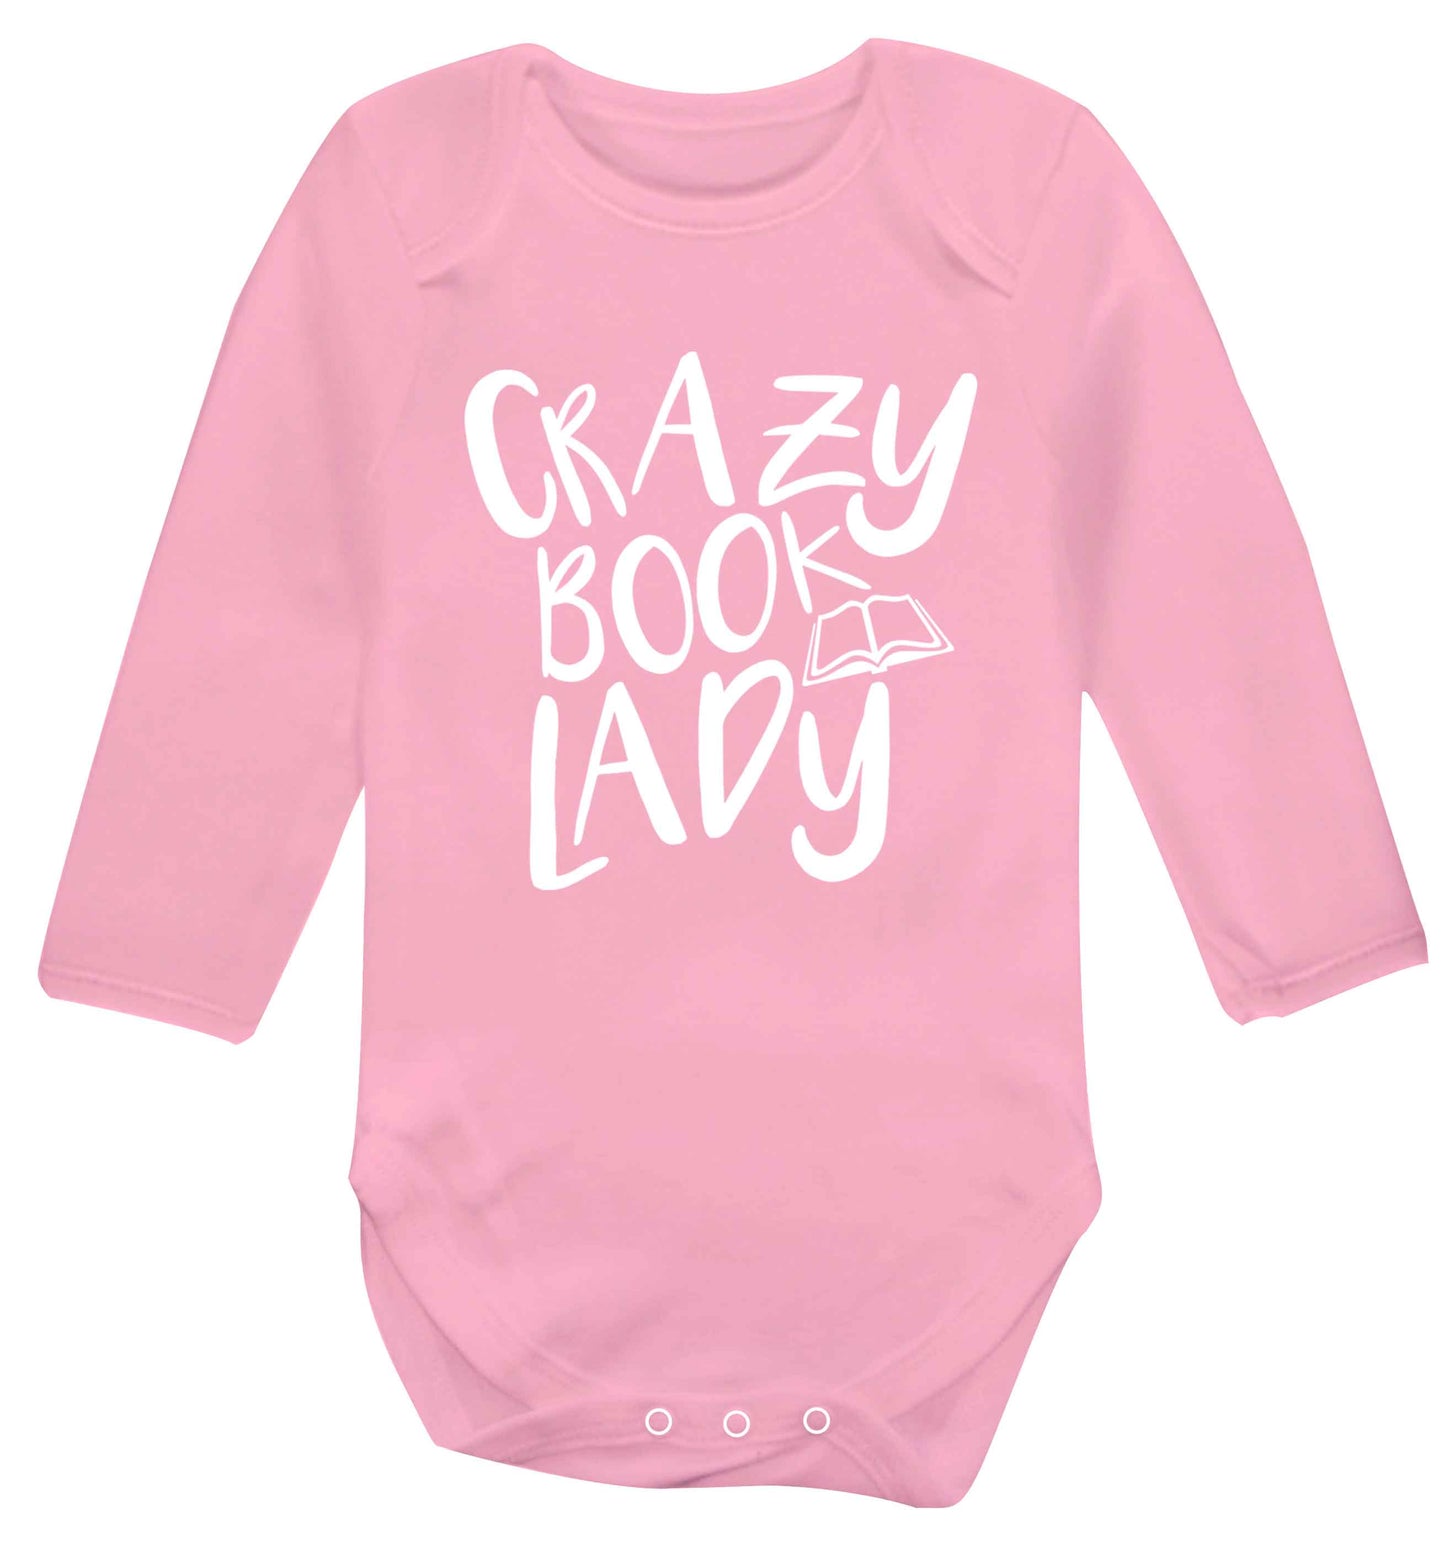 Crazy book lady Baby Vest long sleeved pale pink 6-12 months